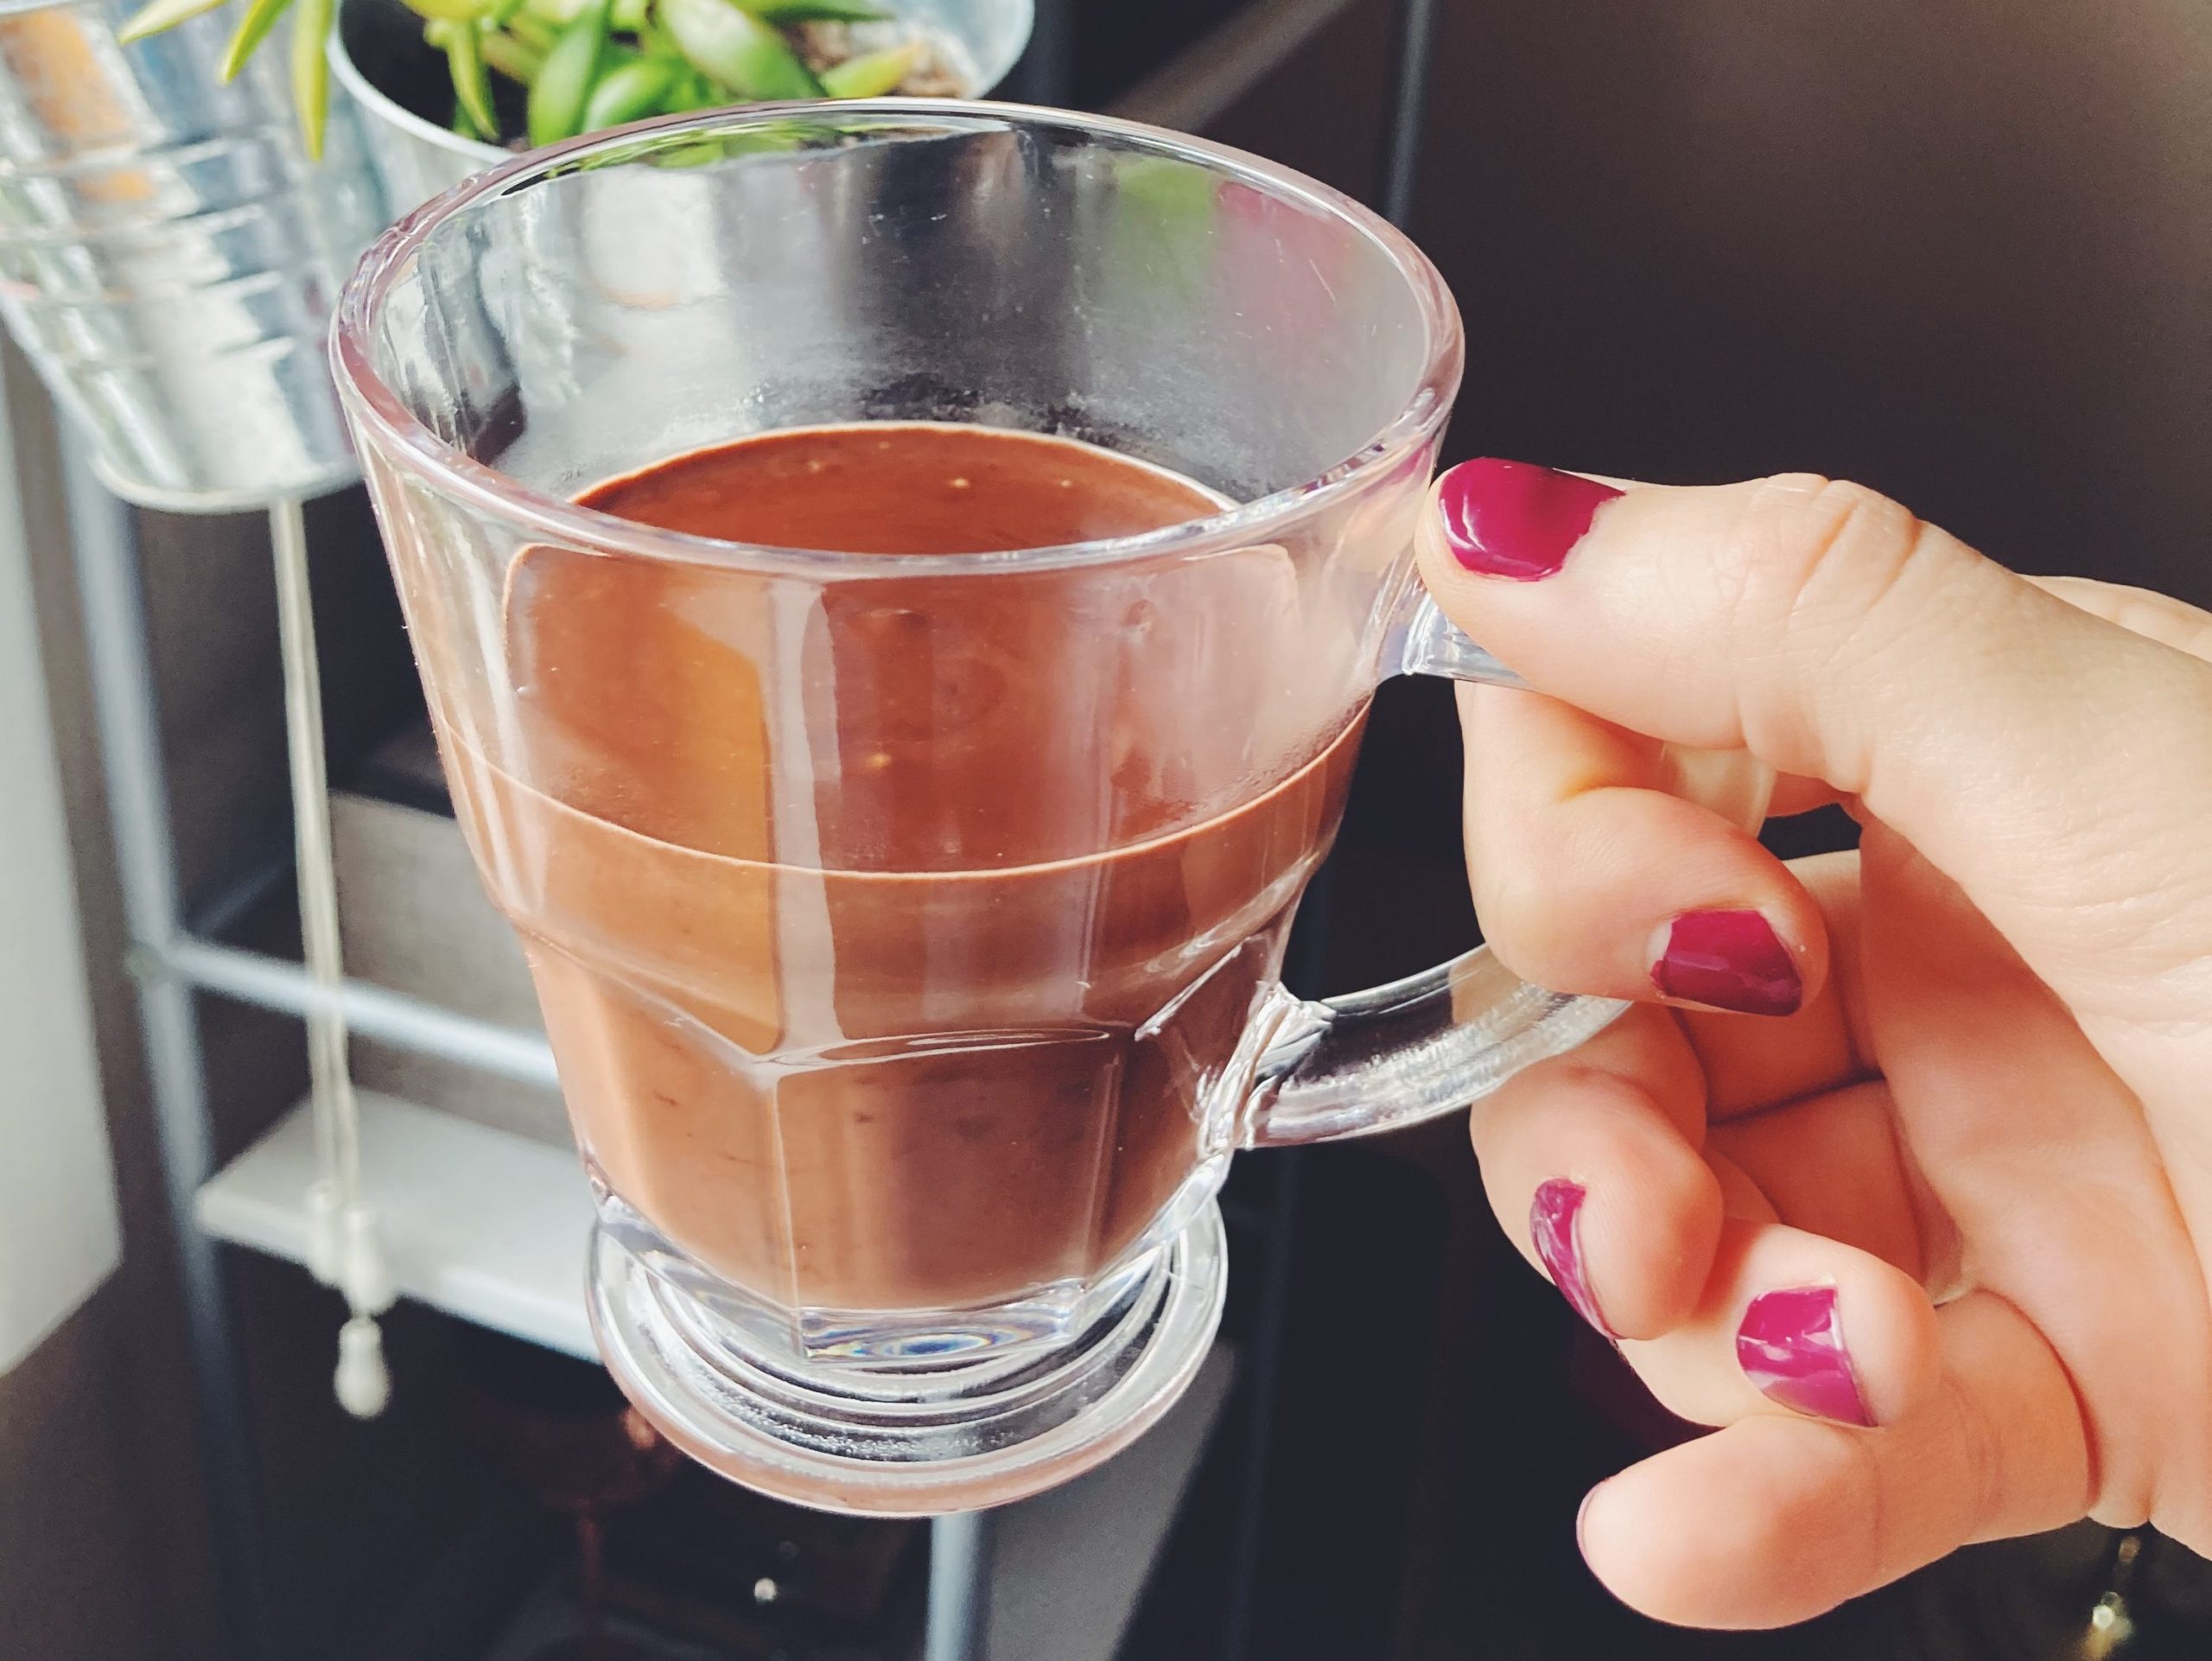 Hand holding a mug of drinking chocolate in a clear glass.